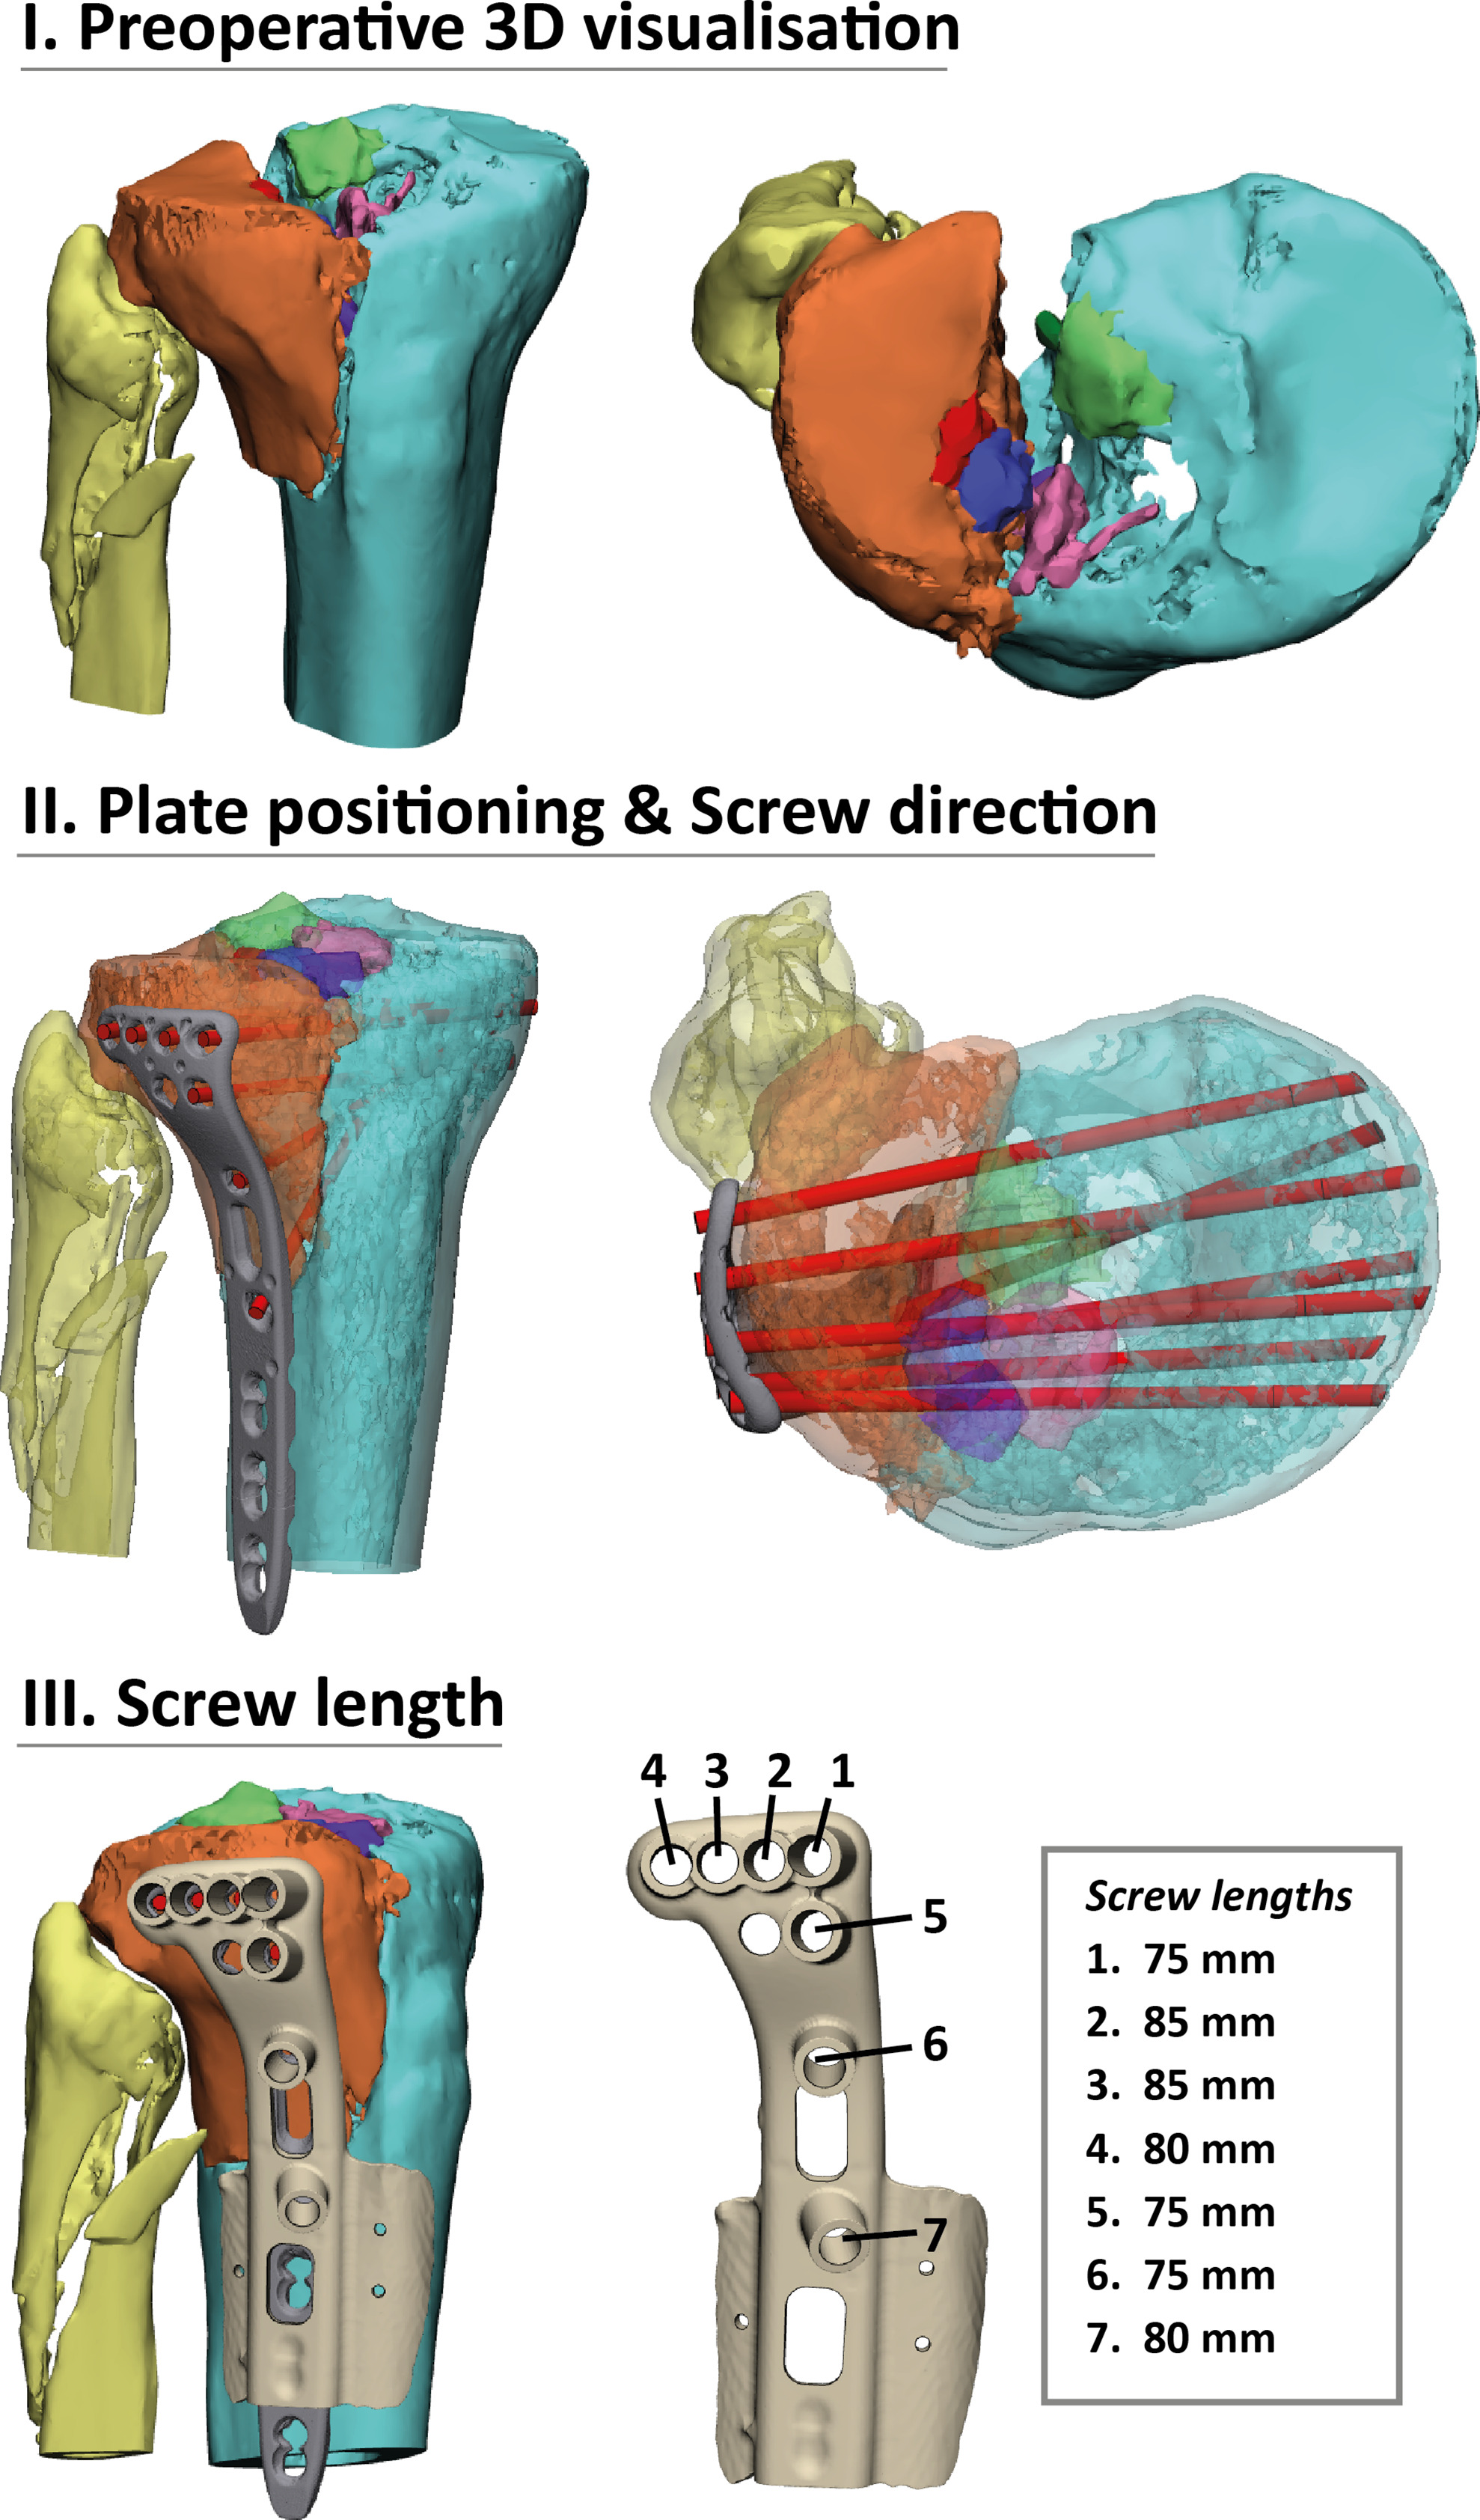 Fig. 2 
            3D virtual surgical planning including visualization of the fracture (I), visualization of the planned position of the plate and directions of screws (II), and the lengths of the screws (III). A 3D-printed guide that fits on top of the plate (III) is used to translate the preoperative plan (e.g. guiding plate position, screw directions, screw lengths) to the actual operative procedure.
          